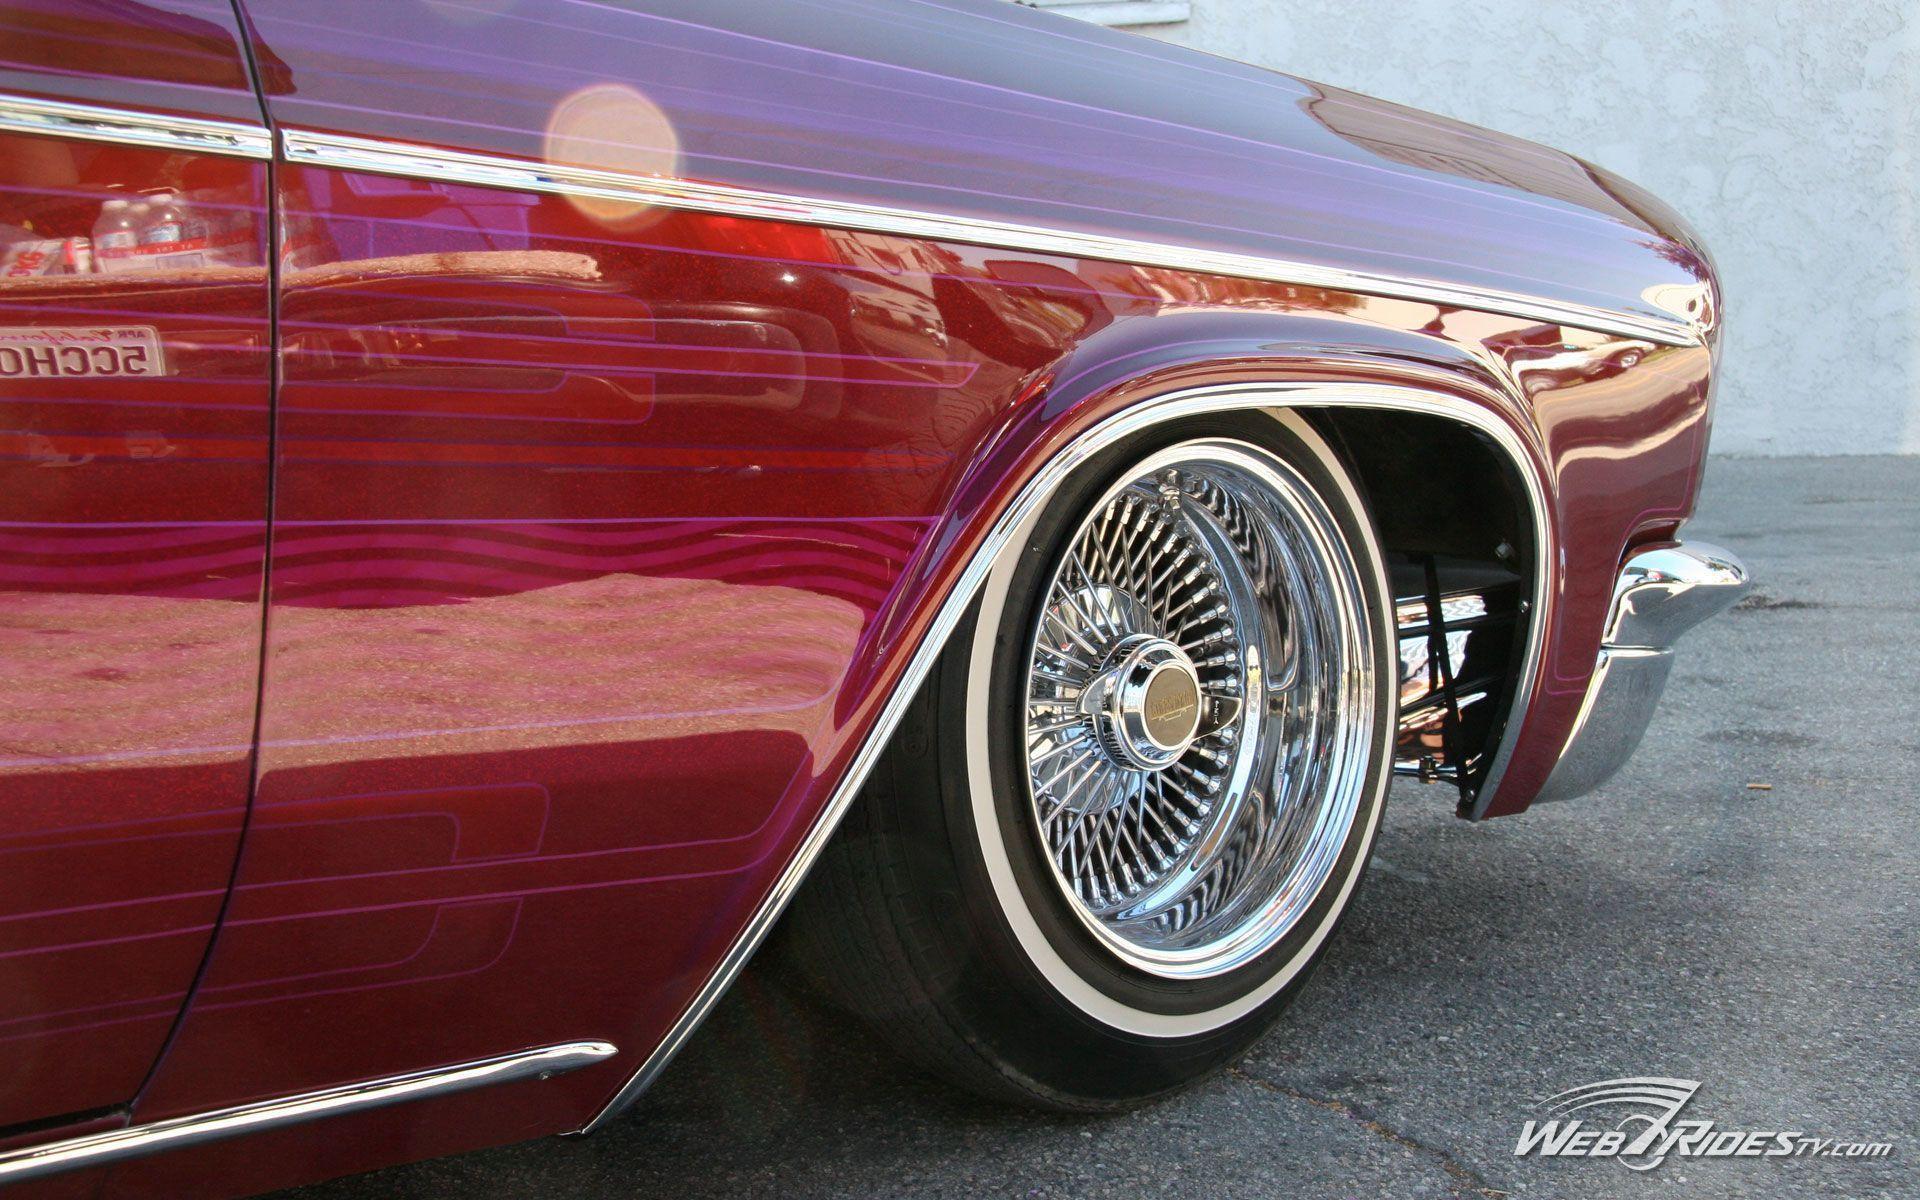 Pix For > Lowrider Cars Wallpaper